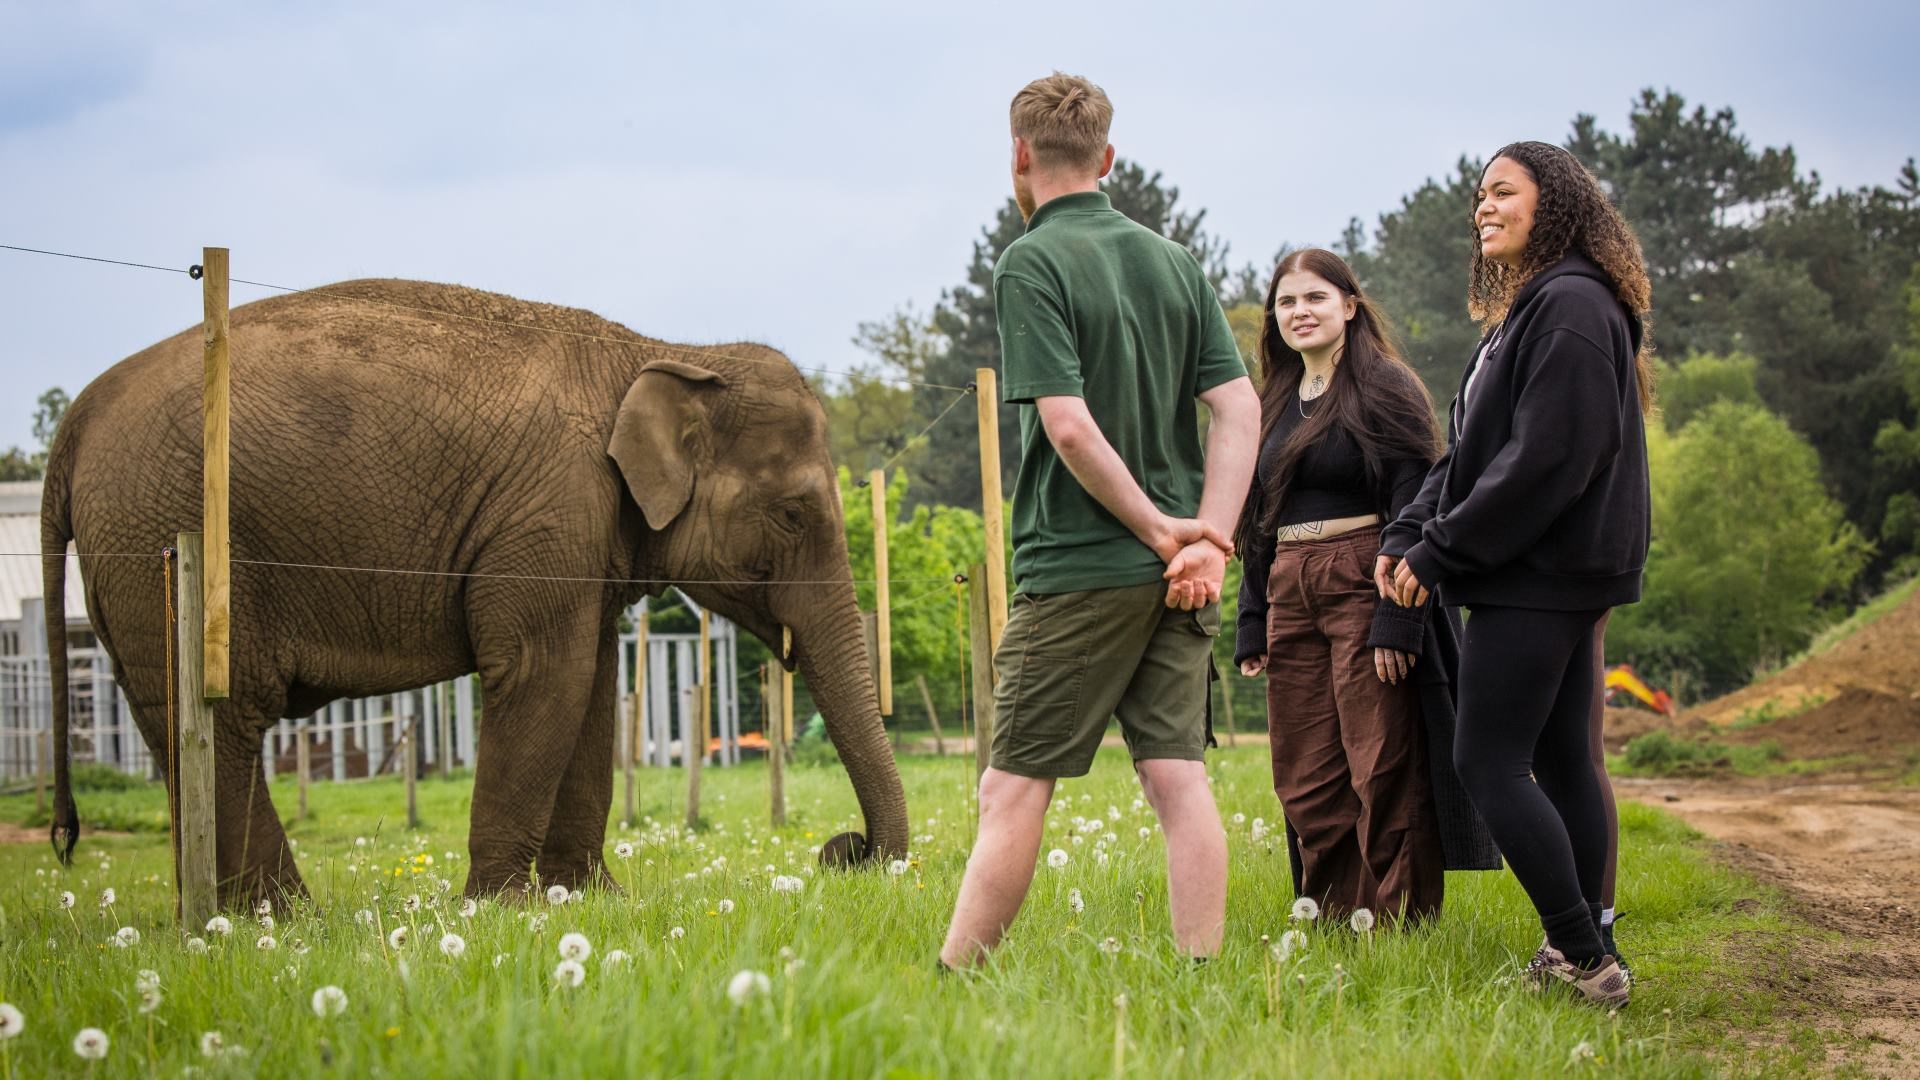 Two women stand with elephant keeper in woburn safari park uniform as asian elephant tarli grazes peacefully in the background 